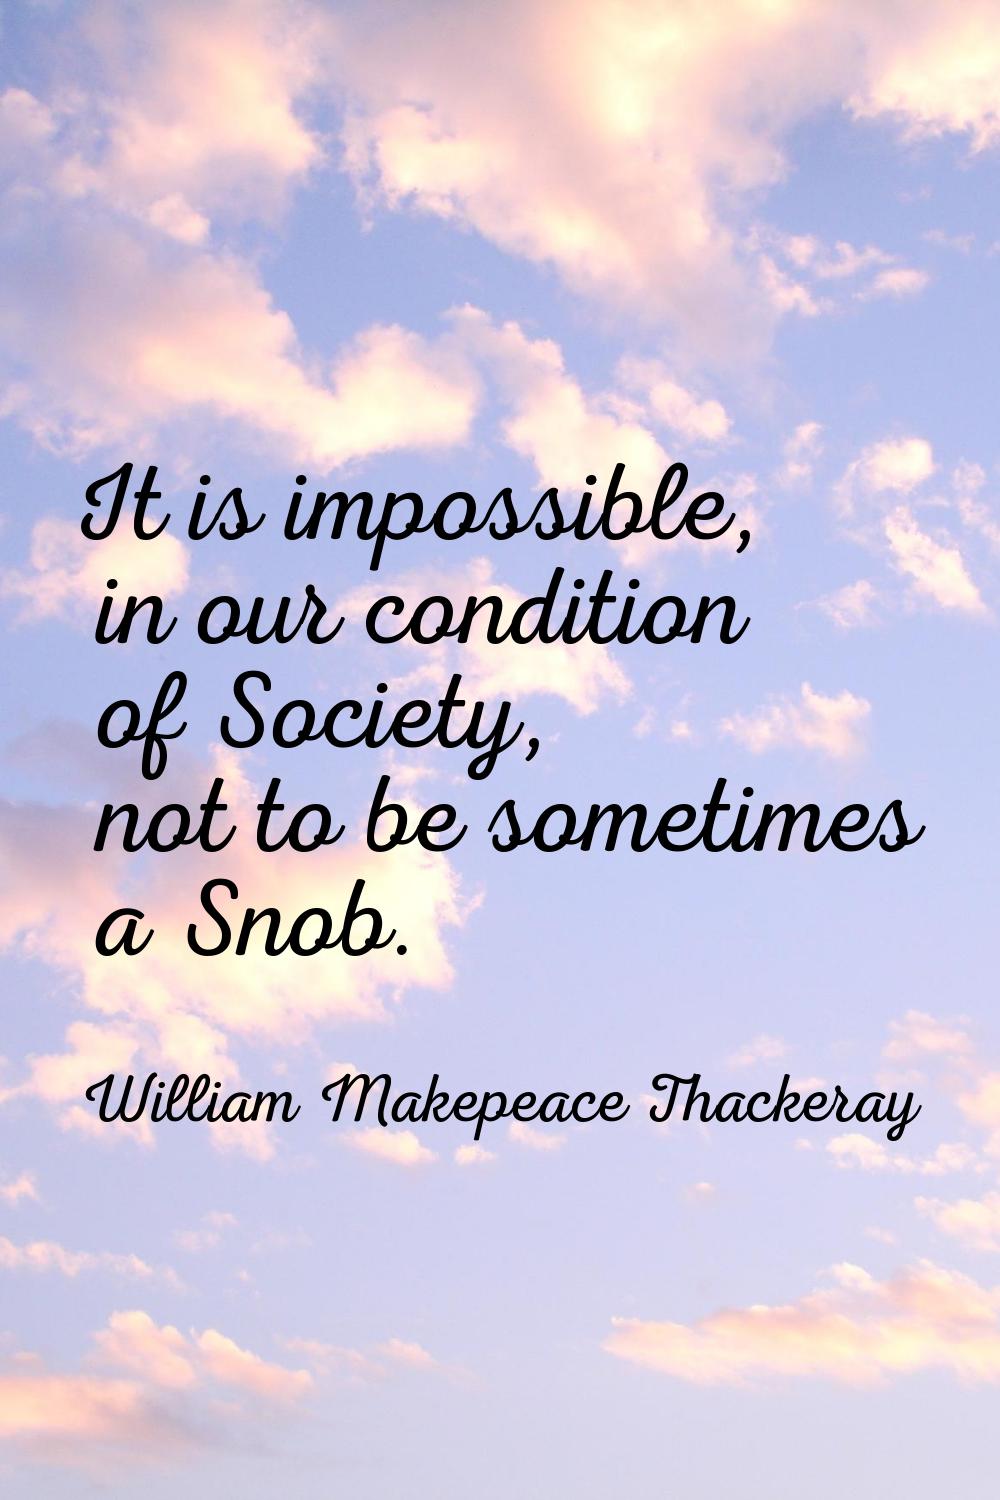 It is impossible, in our condition of Society, not to be sometimes a Snob.